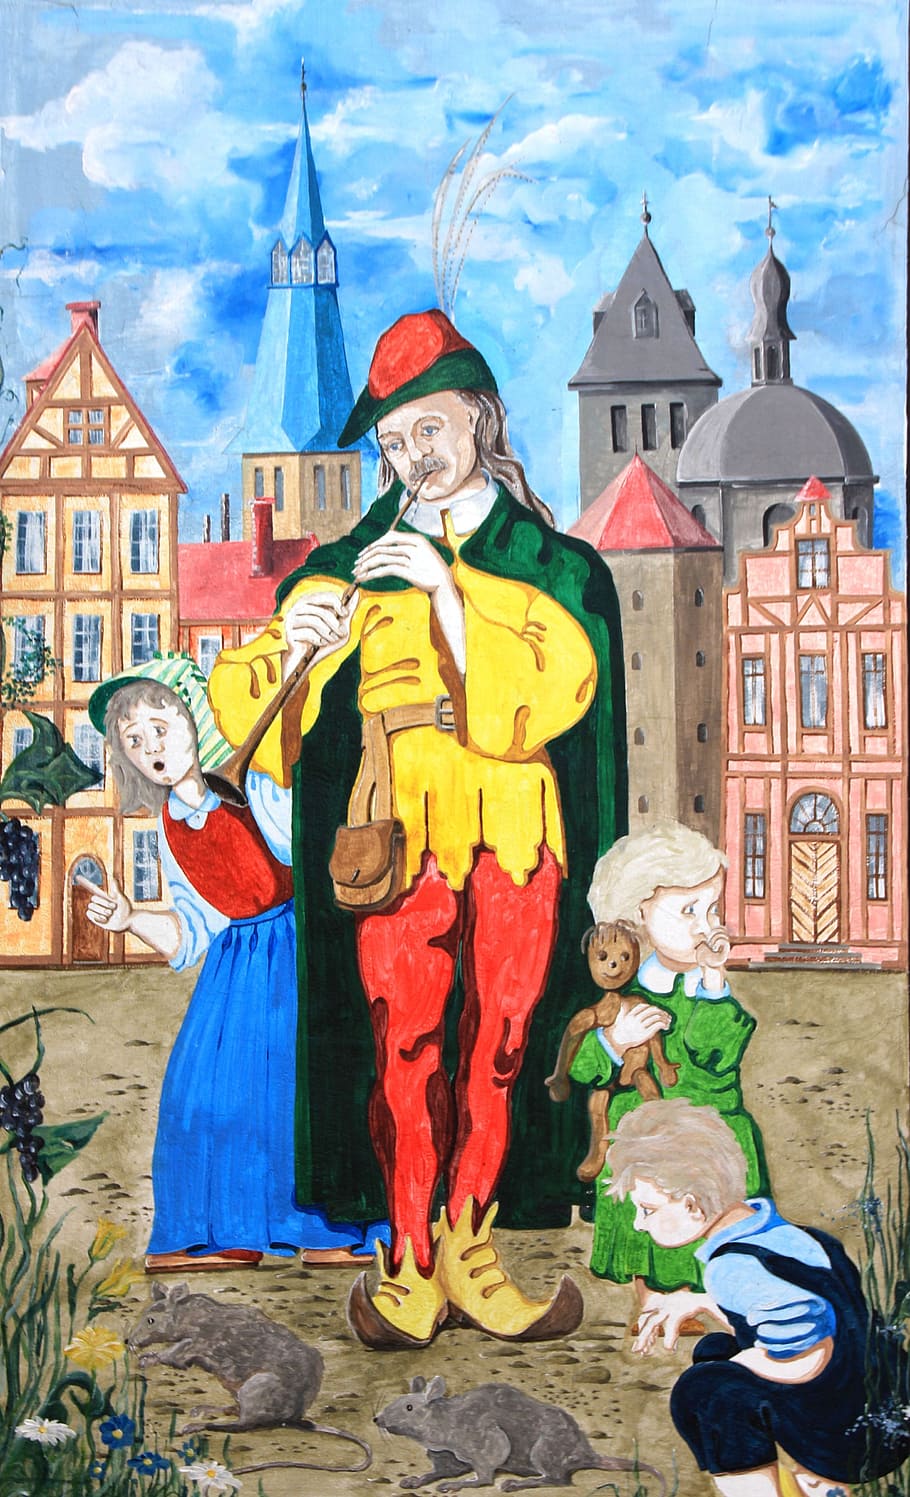 Hamelin, Fairy Tales, Mural, Sage, the pied piper of hamelin, flautist, saga, drawing, children, pied piper